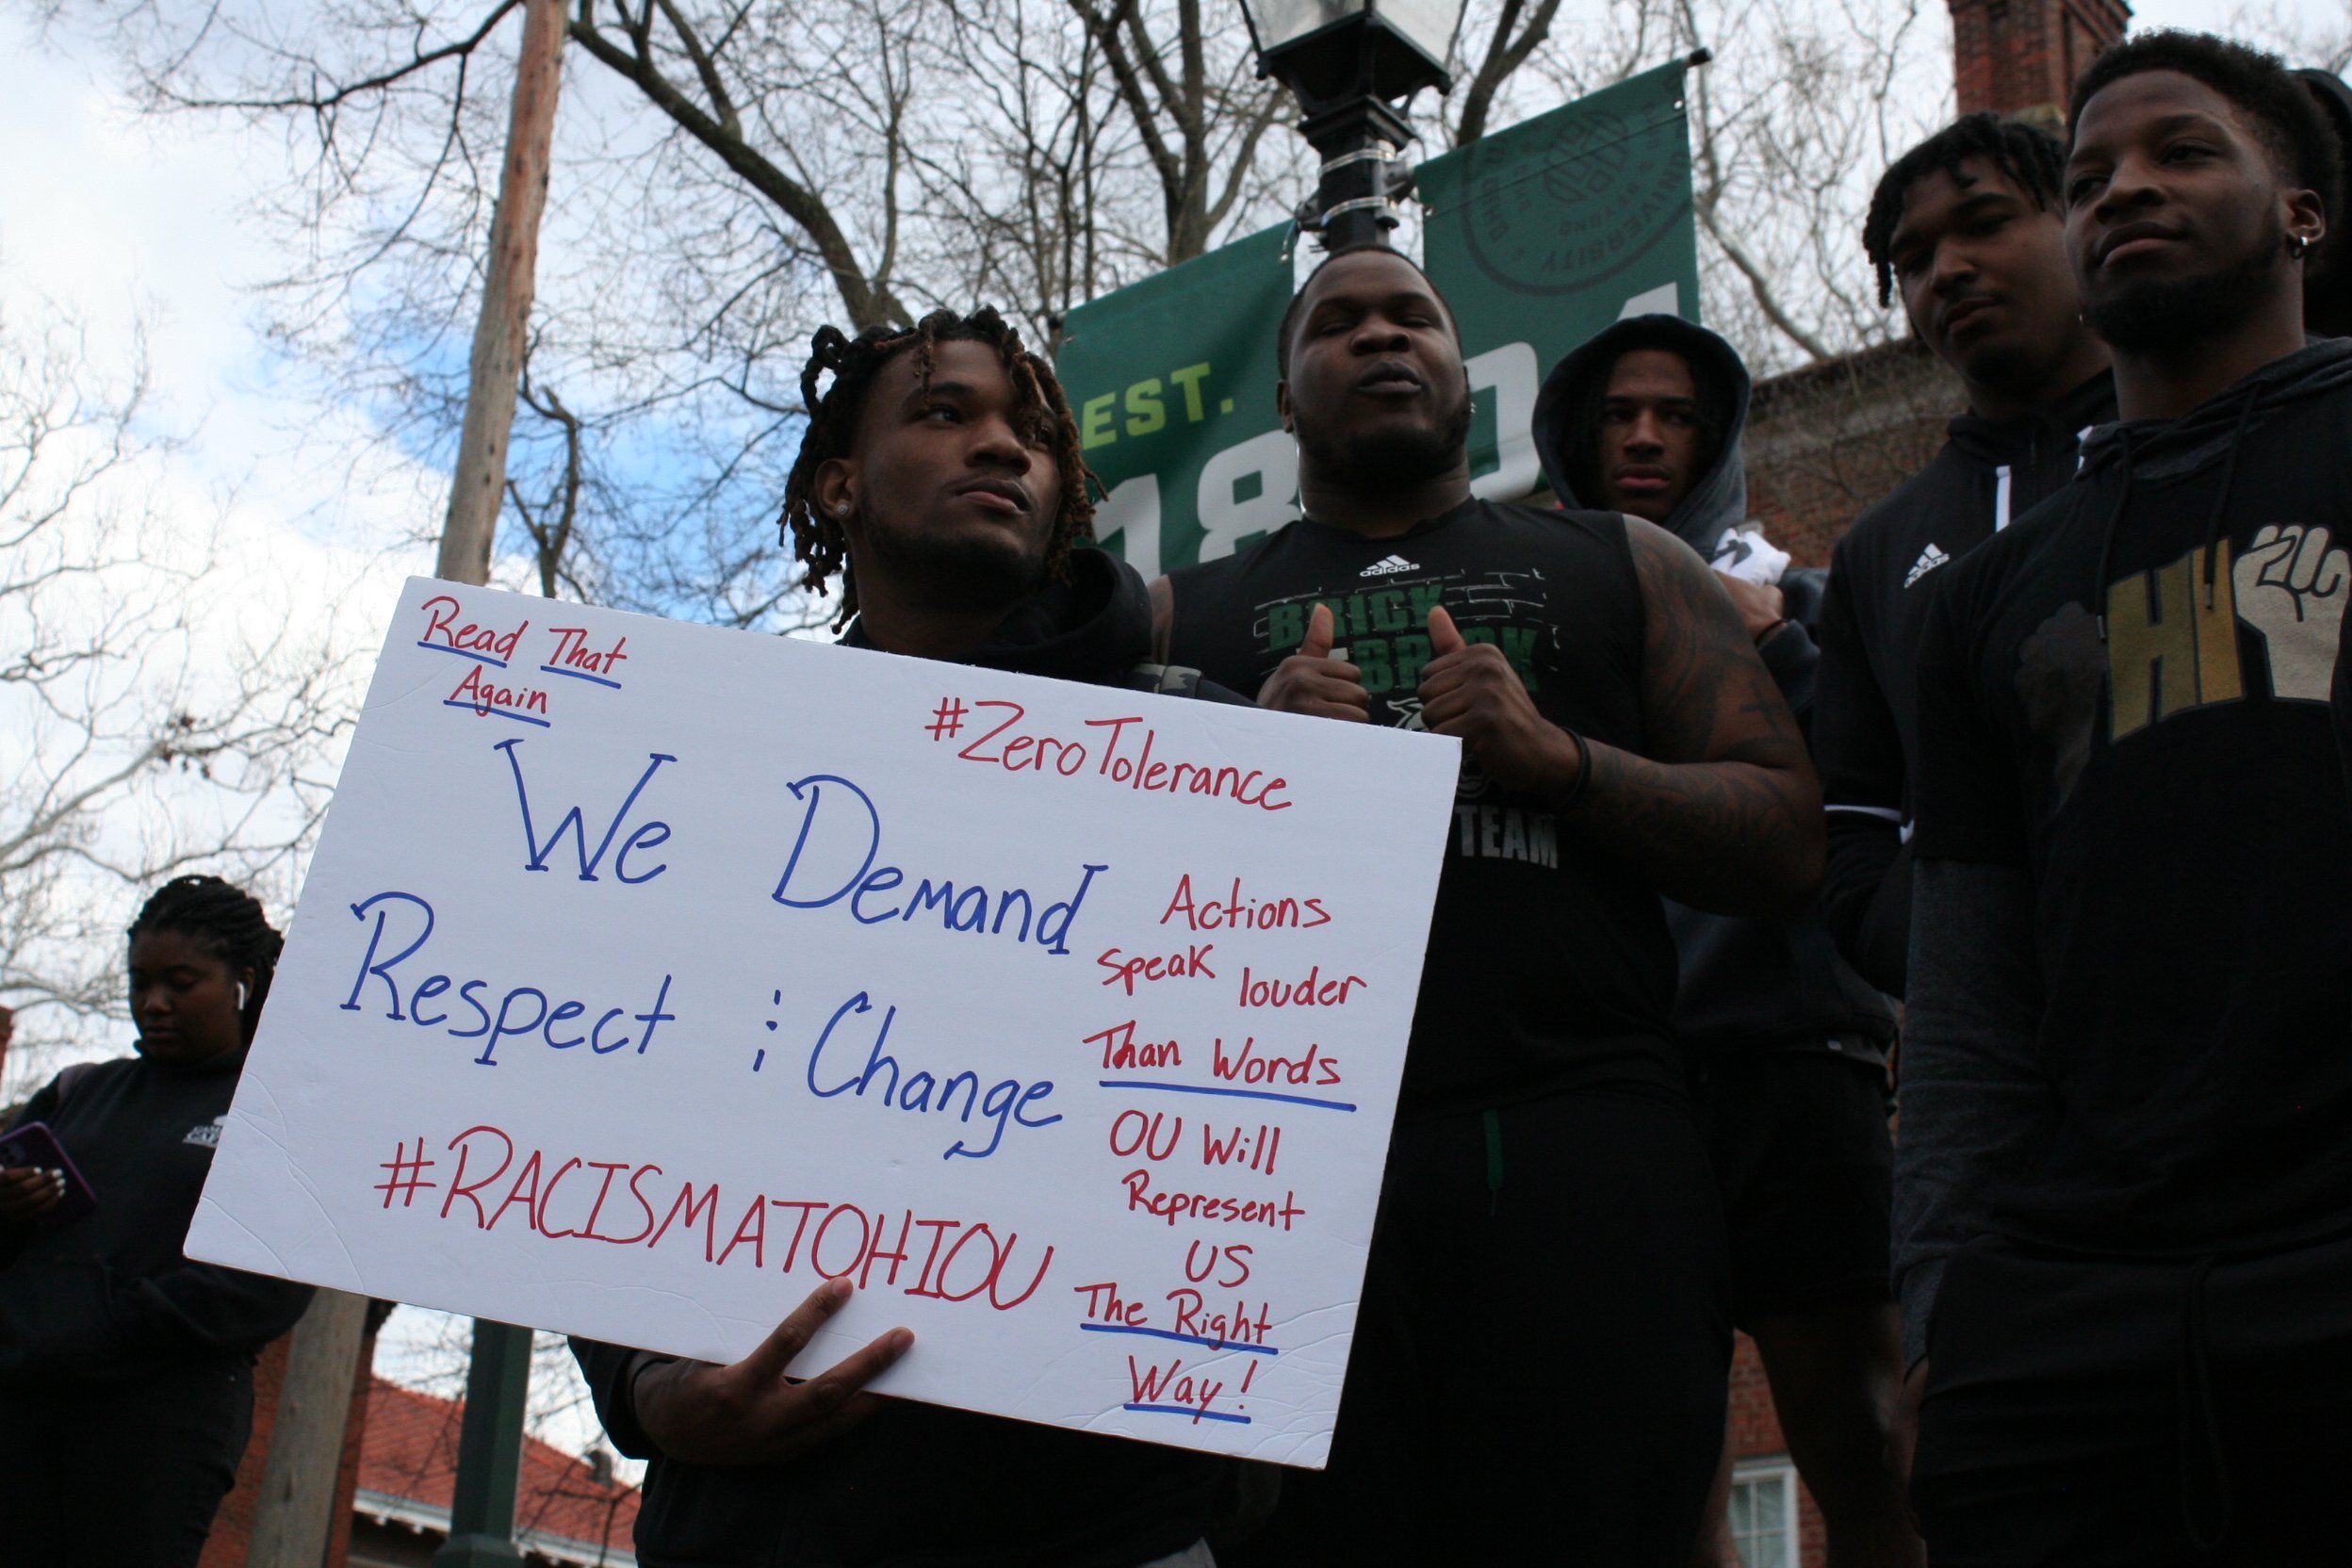  A group of Ohio University football players speak and stand in solidarity with protesters. A member of the team is holding a sign that reads, “Read That Again: We Demand Respect and Change #RACISMATOHIOU” along with “#ZeroTolerance,” “Actions speak 